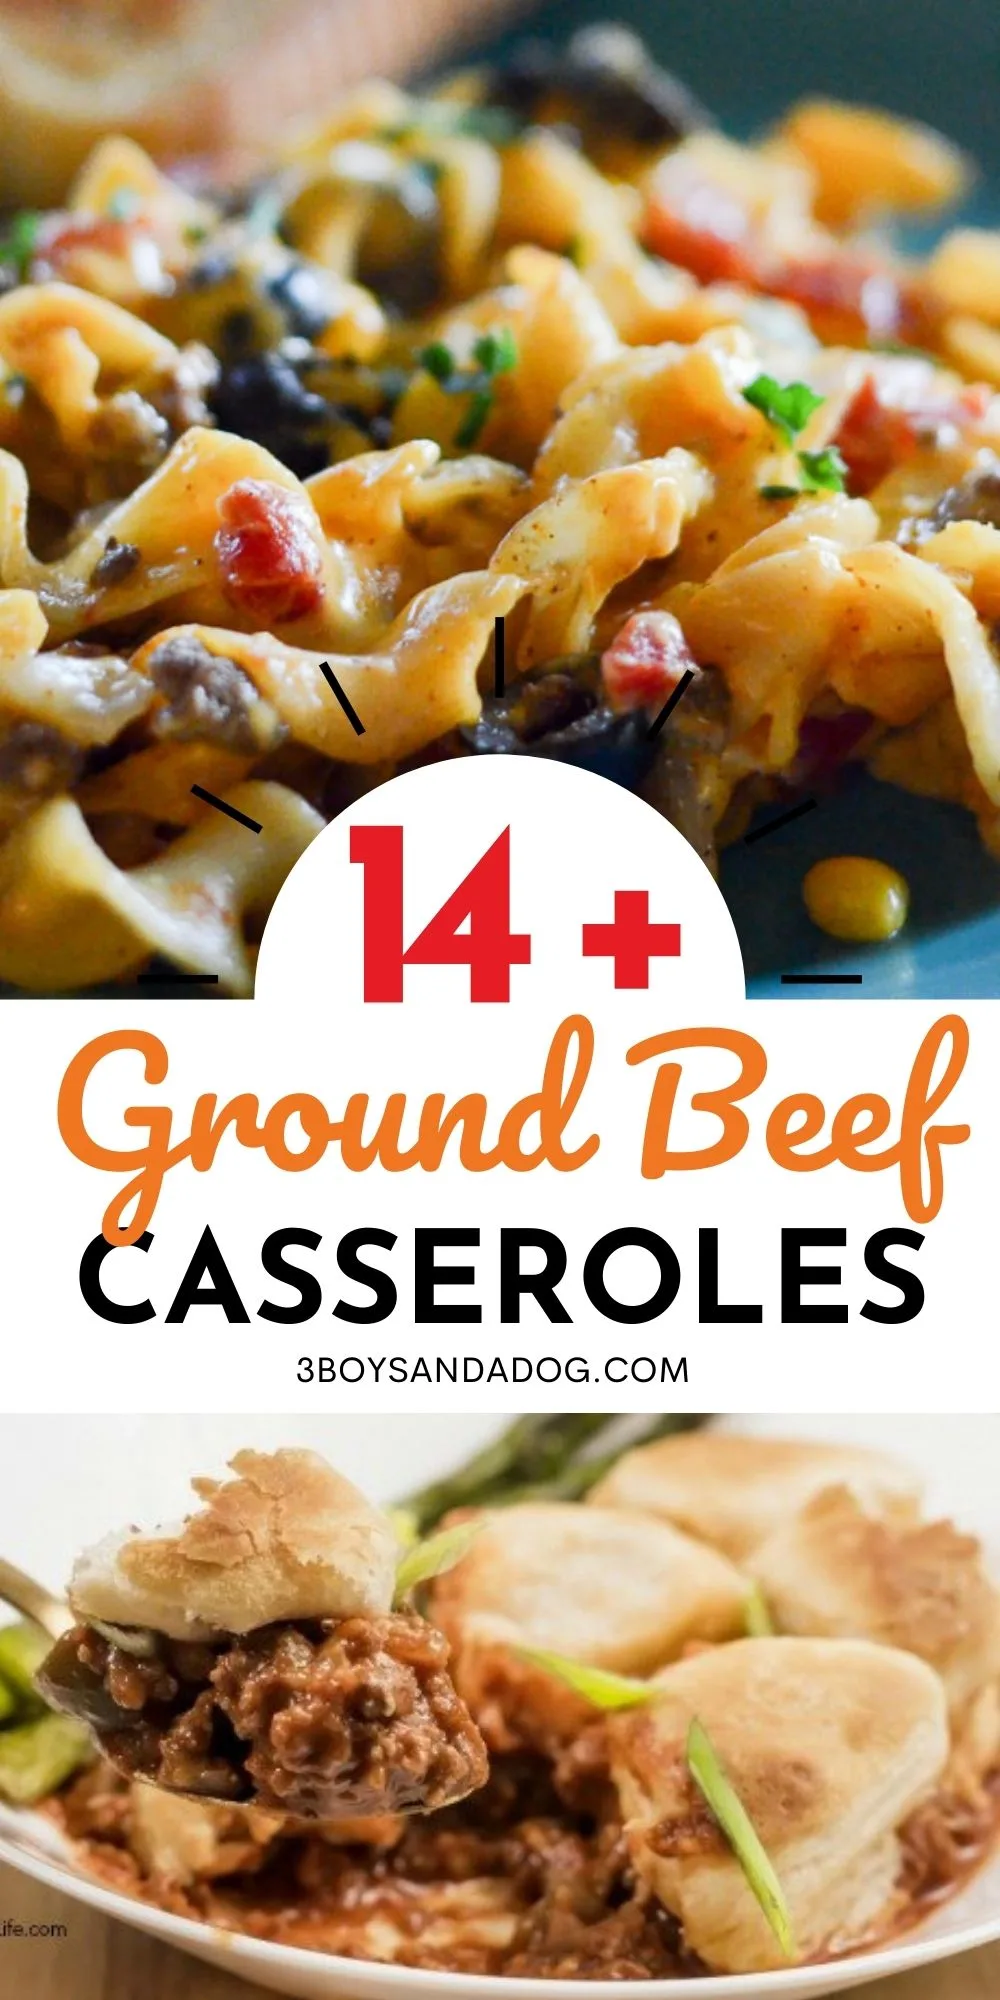 filling casseroles that use ground hamburger meat